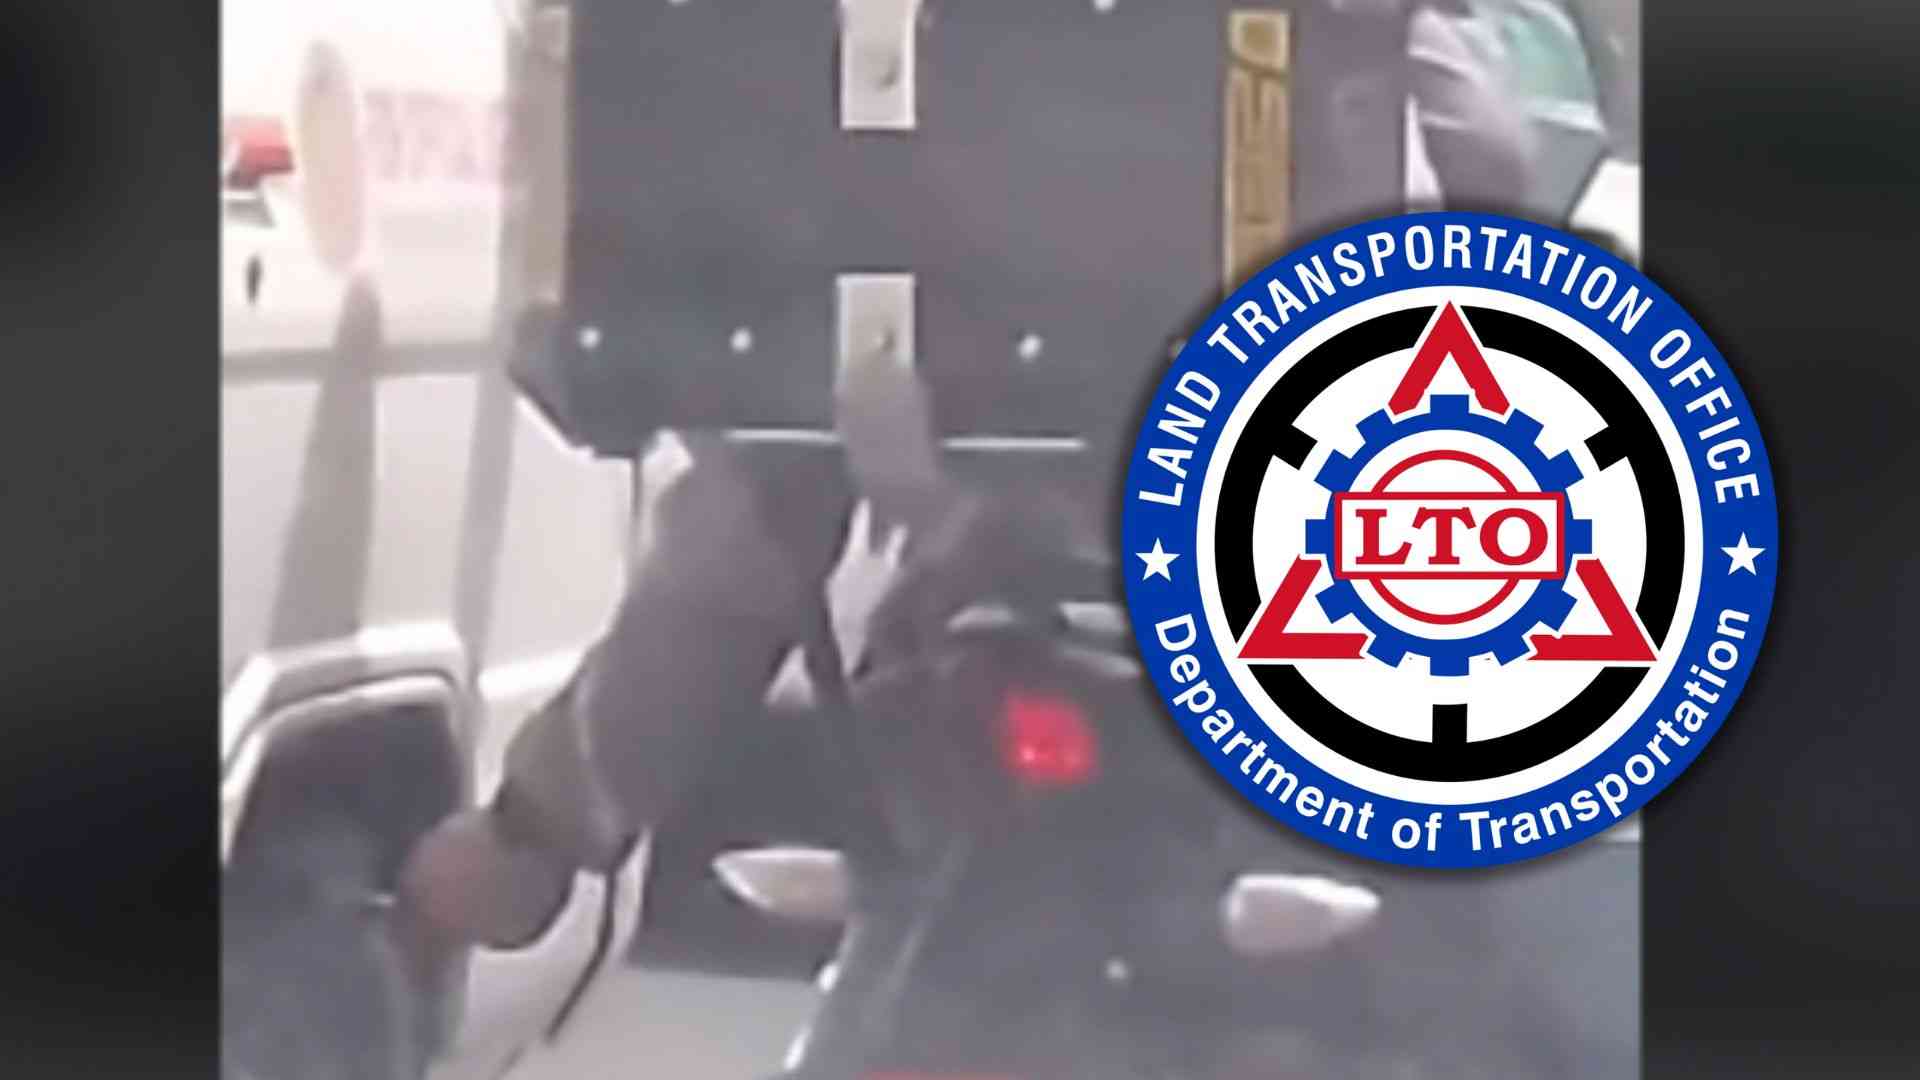 LTO issues show-cause order vs. motorist in viral video